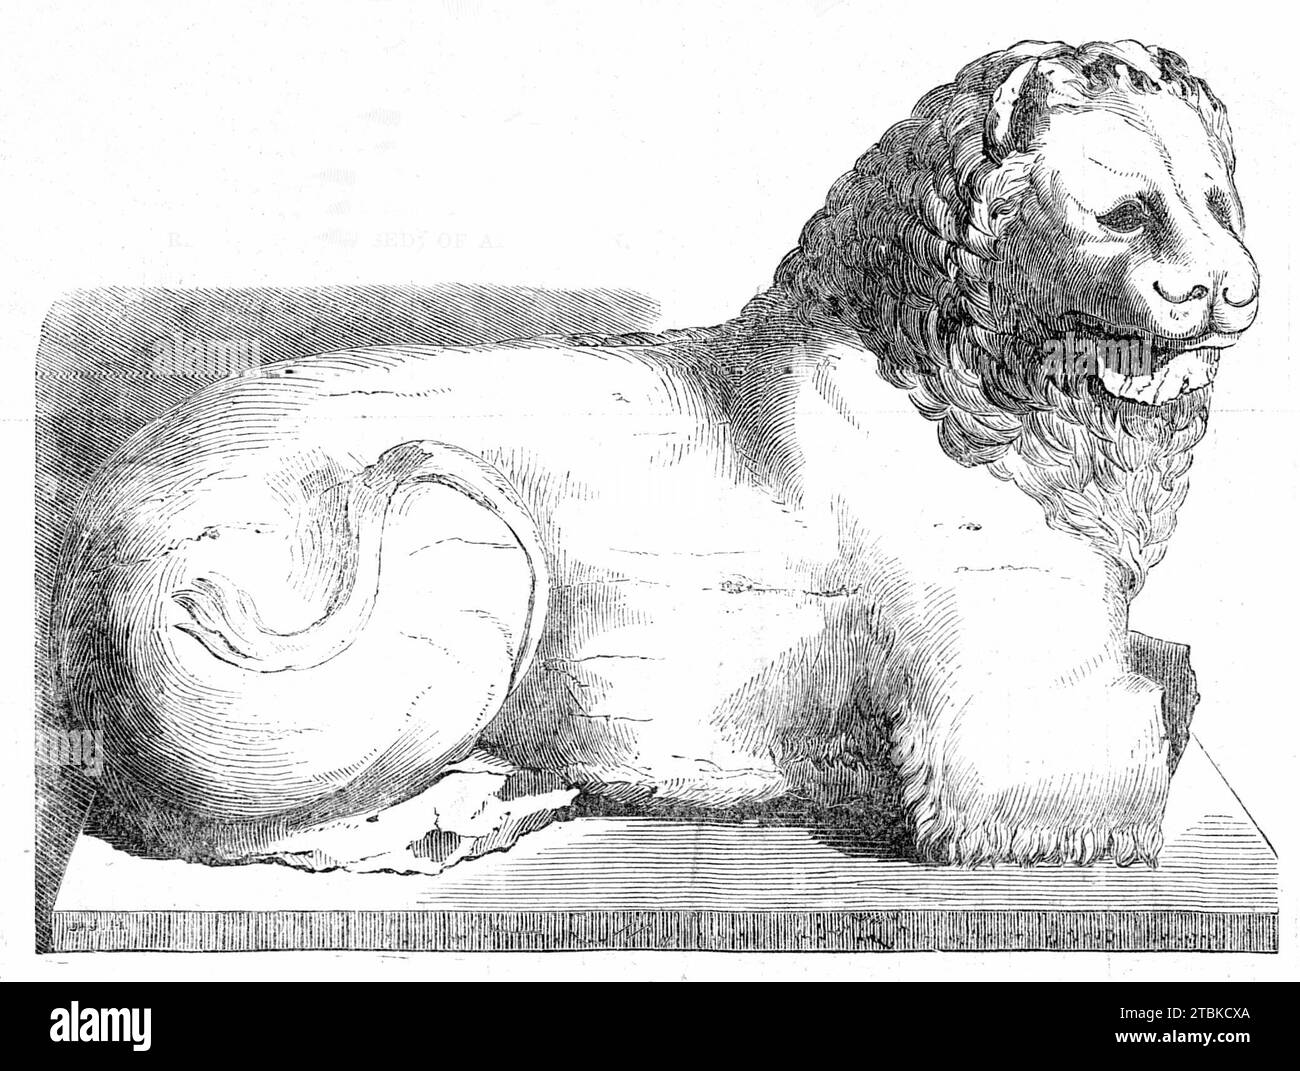 Colossal marble lion from Cnidus, 1861. '...a magnificent example of colossal Greek sculpture...Its dimensions are 10ft. in length and 6ft. in height...The body is crouching...It was generally in fine condition; but being...exposed to the weather, the surface had suffered in some degree, though not to an extent to destroy the main anatomical markings, which retain their original boldness. The entire lion has been sculptured out of one block of Parian marble, with the exception of the forepaws, which had been united to the body by a joint, and are lost...This fine piece of sculpture was discove Stock Photo